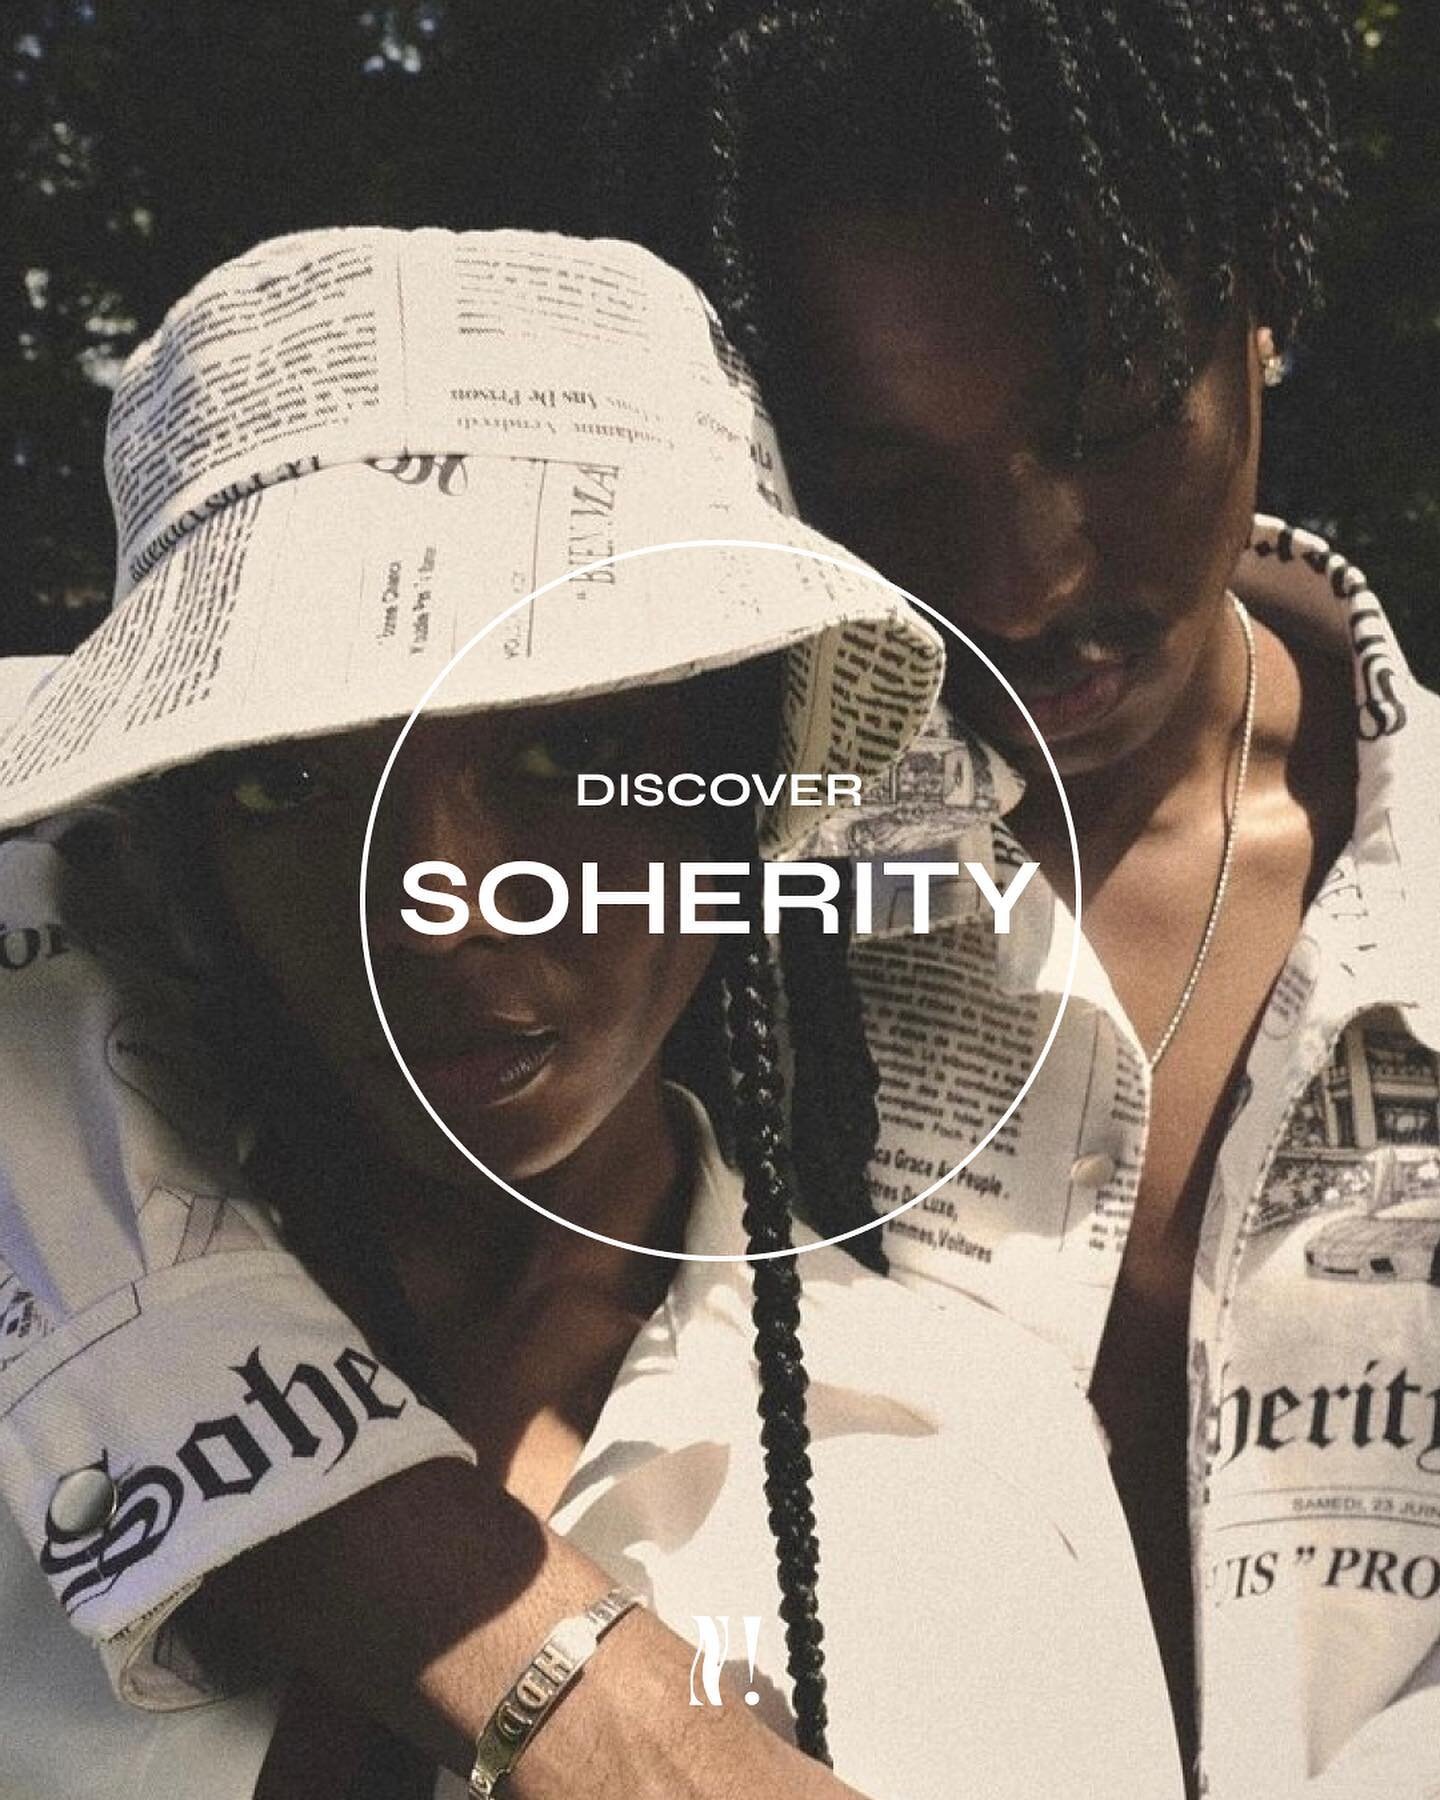 [DISCOVER] Soherity is a unisex lifestyle brand distilling founder Guifty Dossou's West African roots and Western streetwear influences into casual sets blending popular African imagery. 
⠀⠀⠀⠀⠀⠀⠀⠀⠀⠀⠀⠀ &nbsp;⠀⠀⠀⠀⠀⠀⠀⠀⠀⠀⠀⠀
Launched in 2020 by the Togole